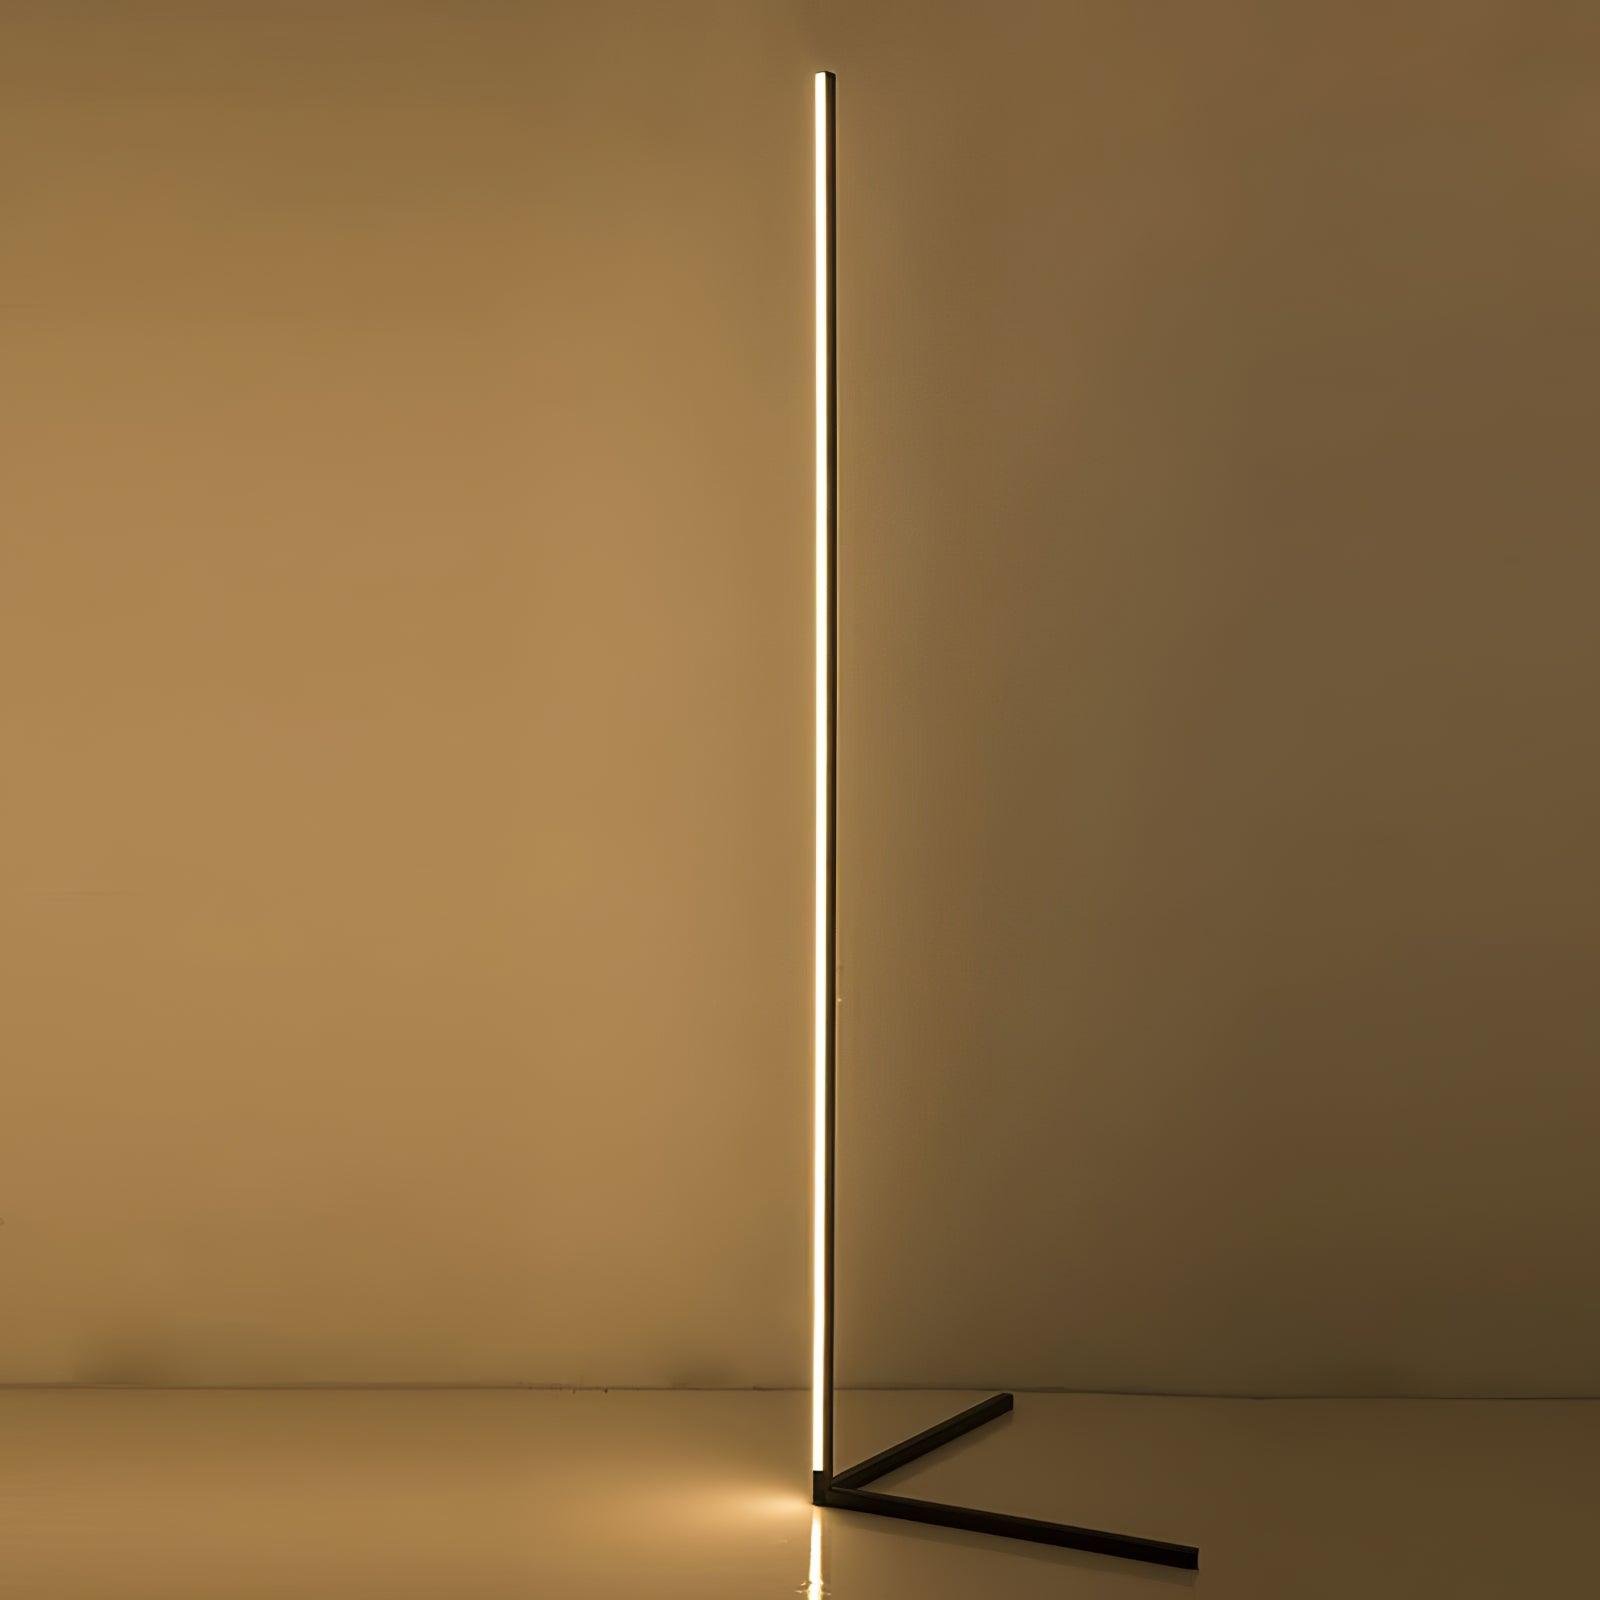 Black UK Plug Minimalist LED Floor Lamp with a Diameter of 15.7 inches and a Height of 55.1 inches (40cm x 140cm)